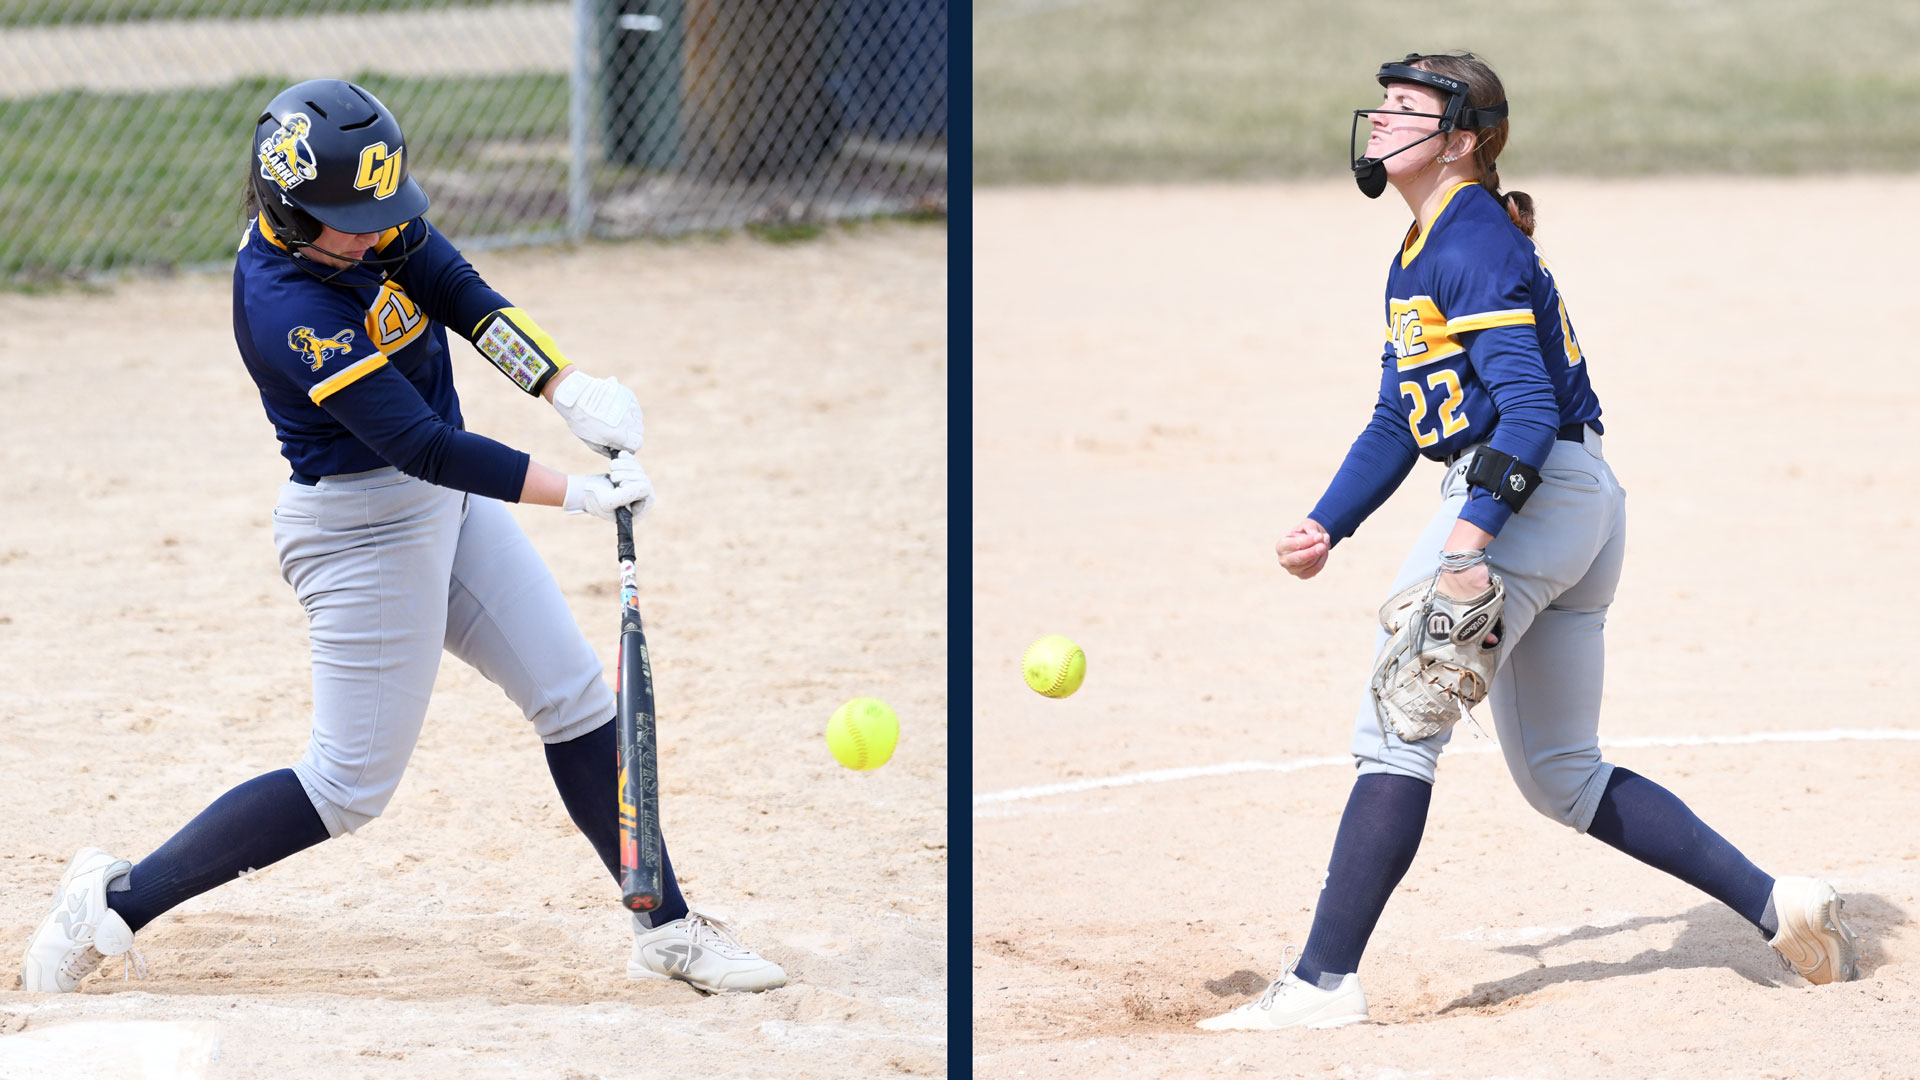 Huseman's dominance and timely hitting leads Pride to split doubleheader against Graceland